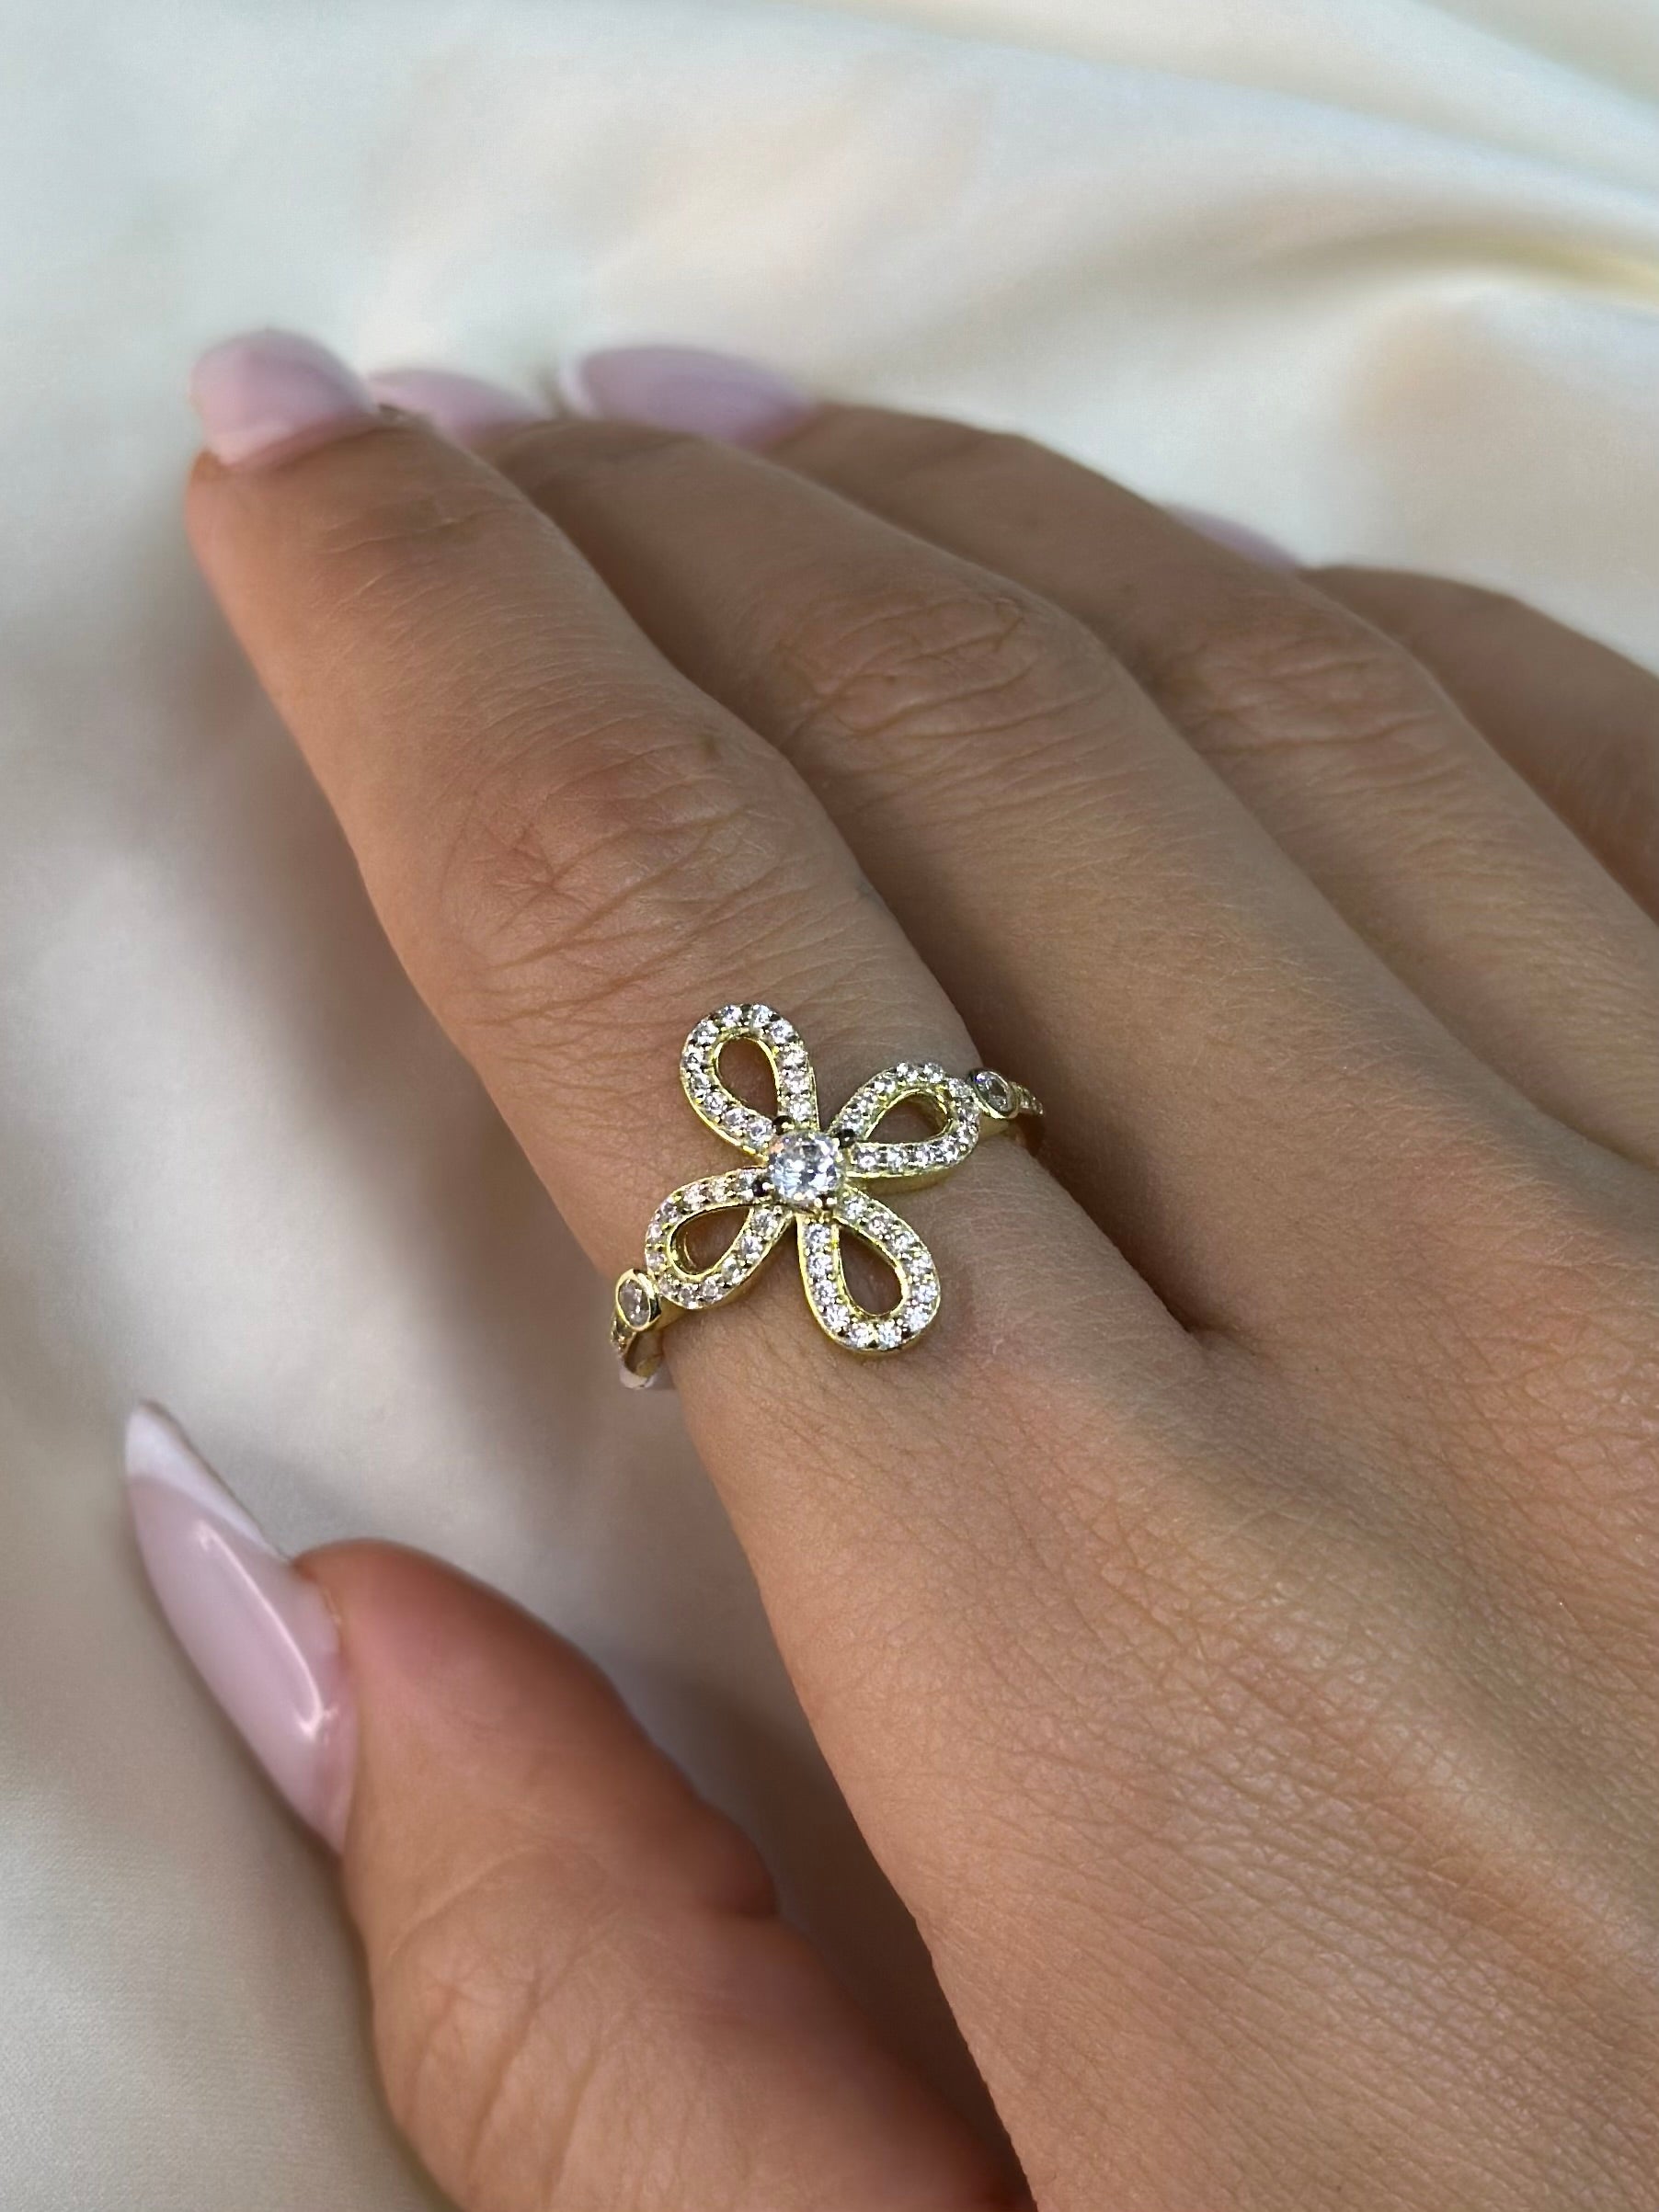 FLOWER RING WITH A SMALL ZIRCON IN THE MIDDLE